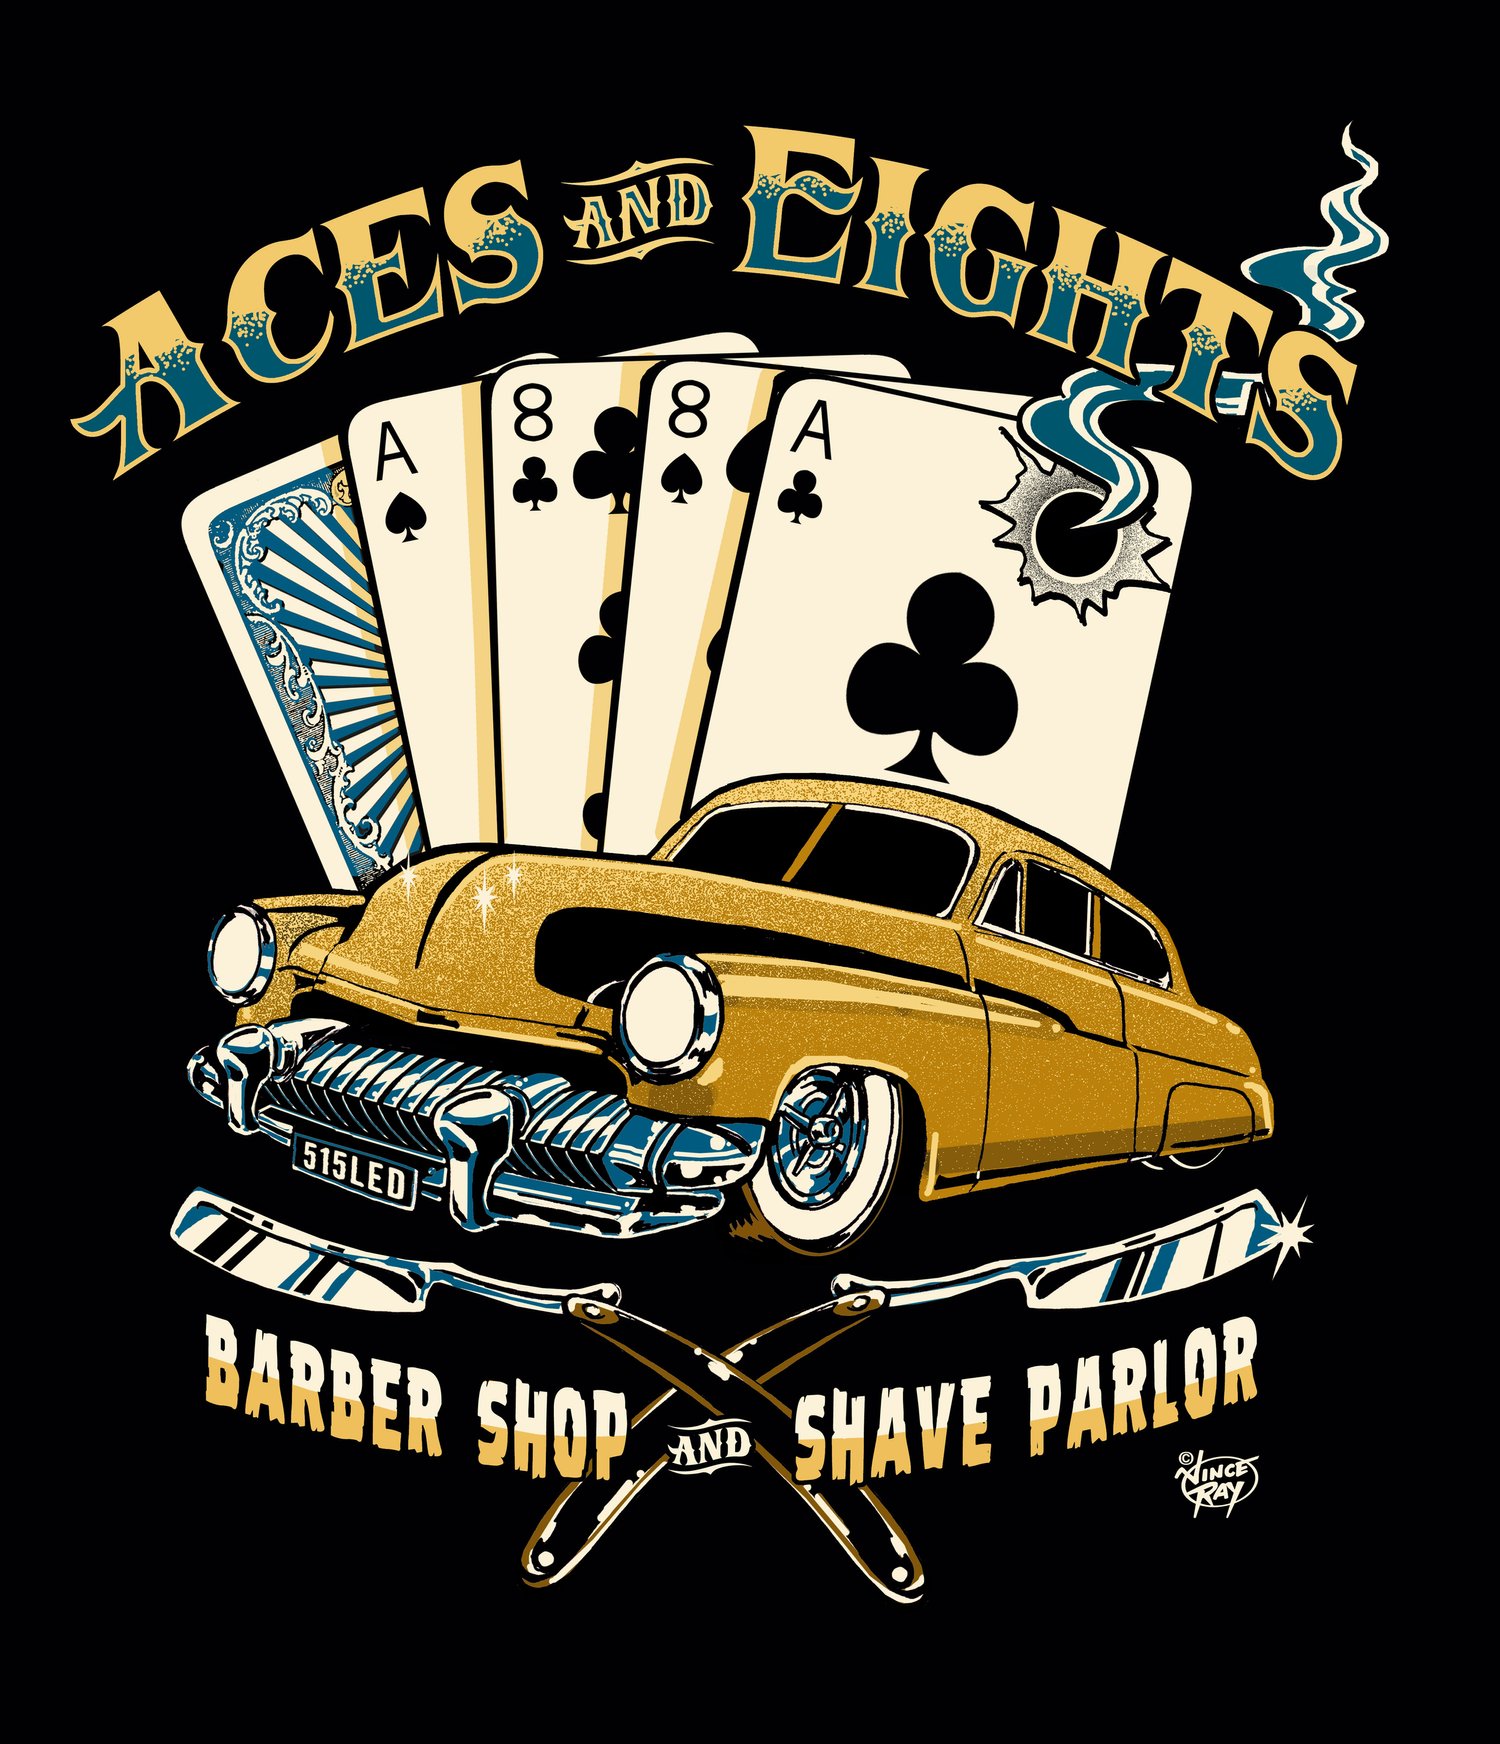 Aces &amp; Eights Barbershop and Shave Parlor